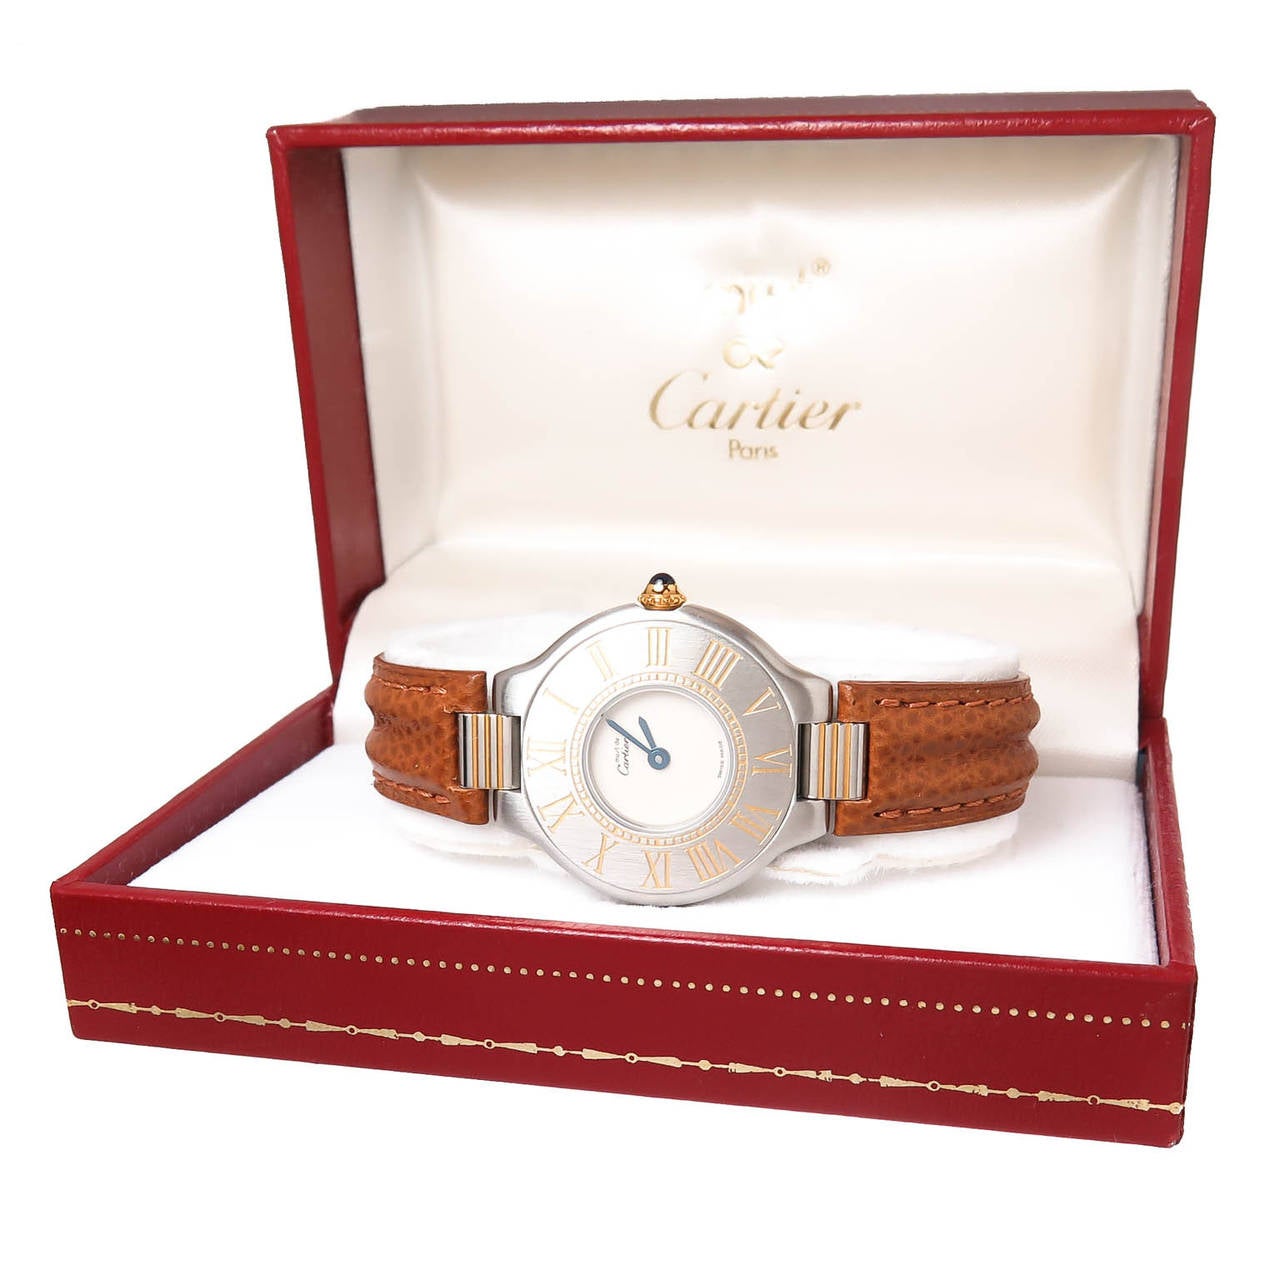 Circa 1990 Cartier Must De Cartier 21 Stainless Steel with Gold Accents Ladies Wrist Watch. 28 M.M. Water Resistant Case, Quartz Movement, Sapphire set Crown.New Brown Leather Cartier strap with Fold Over Deployment Clasp. Original Cartier